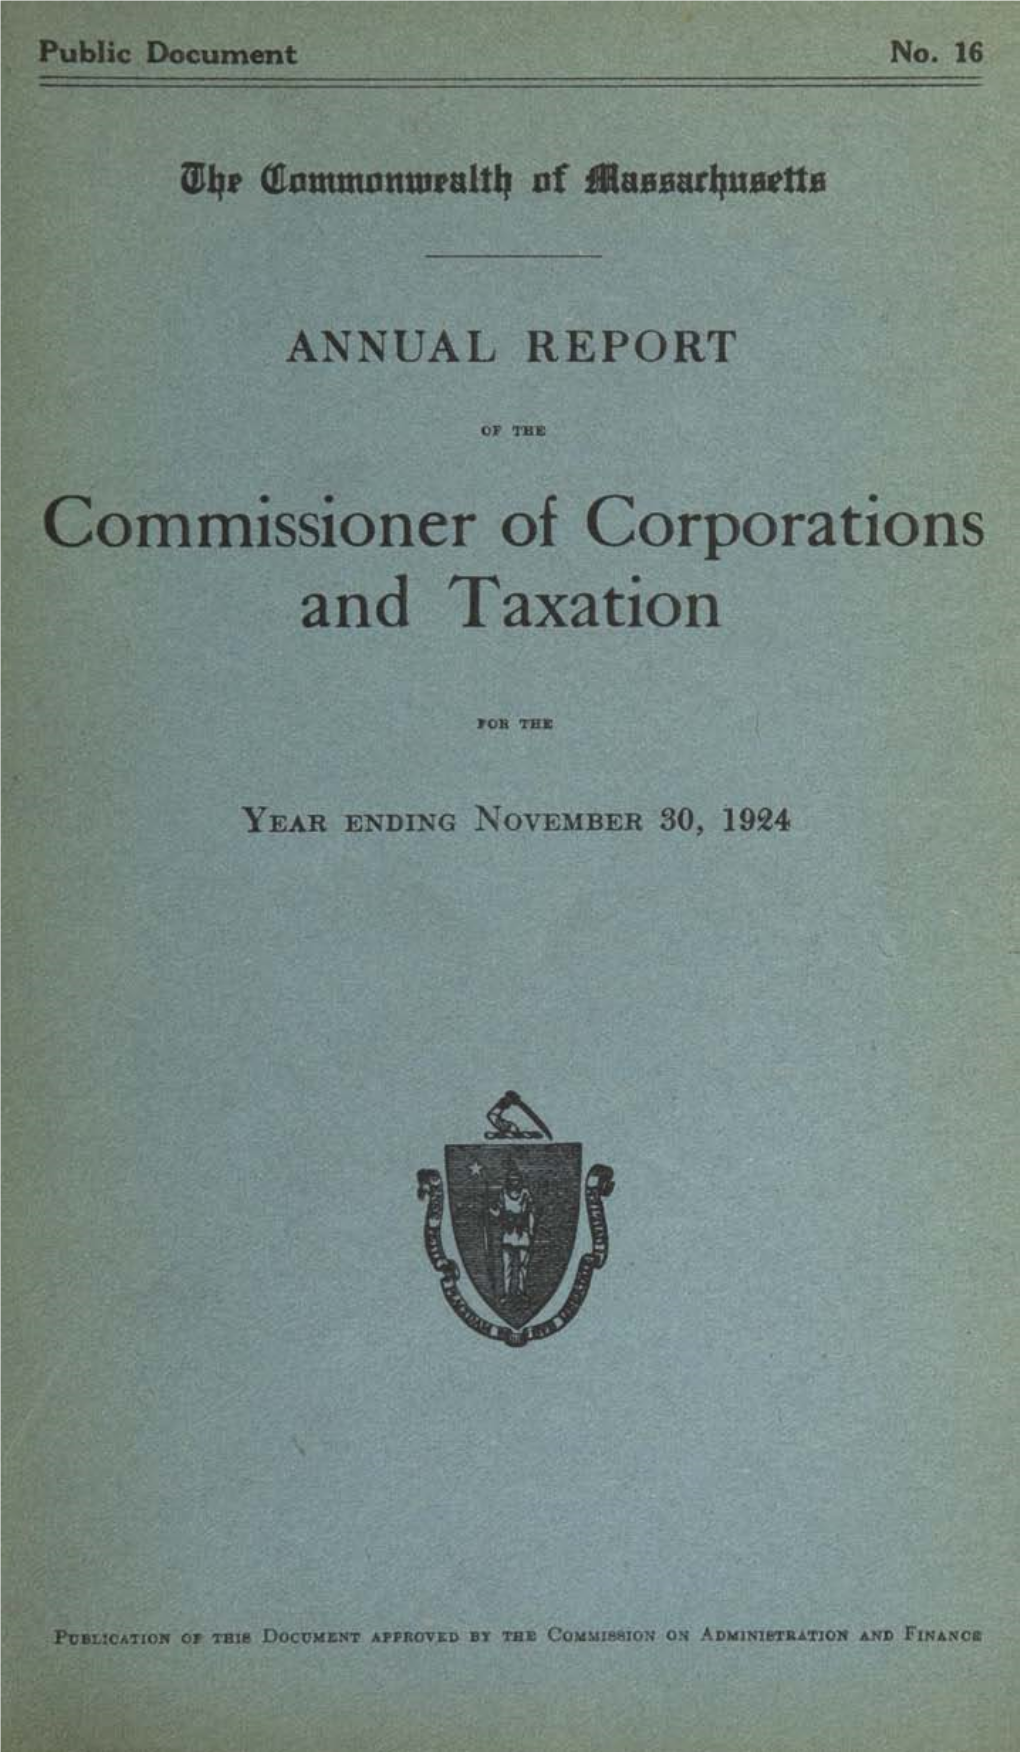 Commissioner of Corporations and Taxation